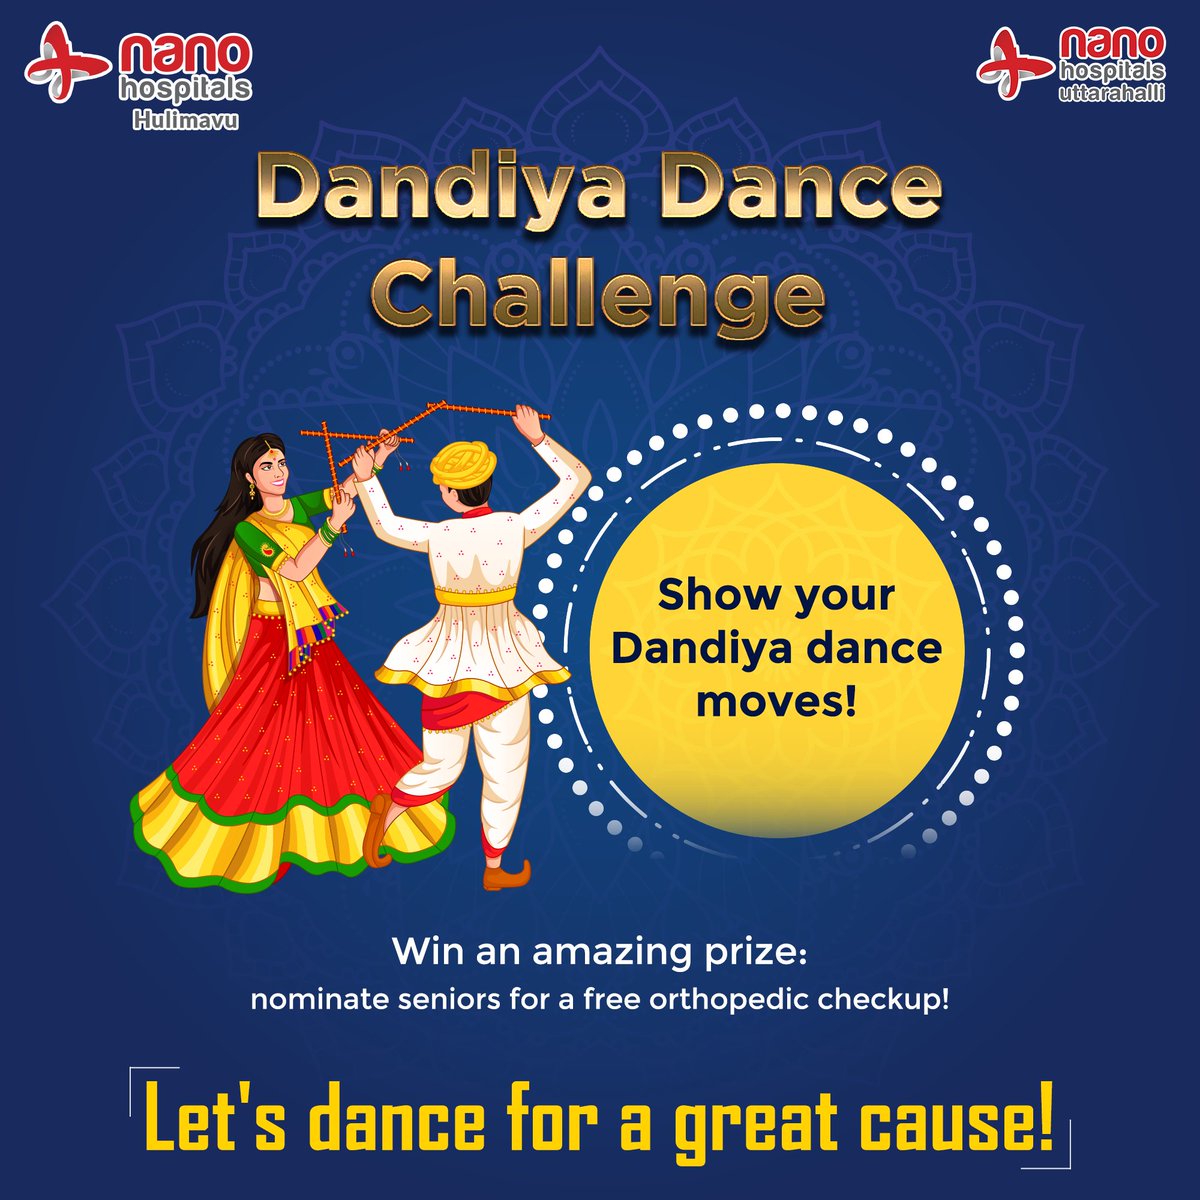 #DanceForHealth 🎁✨
Get ready to groove with the #DandiyaDanceChallenge 

The best performance will earn you the opportunity to nominate senior citizens for a '𝒇𝒓𝒆𝒆 𝒐𝒓𝒕𝒉𝒐𝒑𝒂𝒆𝒅𝒊𝒄 𝒉𝒆𝒂𝒍𝒕𝒉 𝒄𝒉𝒆𝒄𝒌𝒖𝒑'. 

Let's dance for a great cause